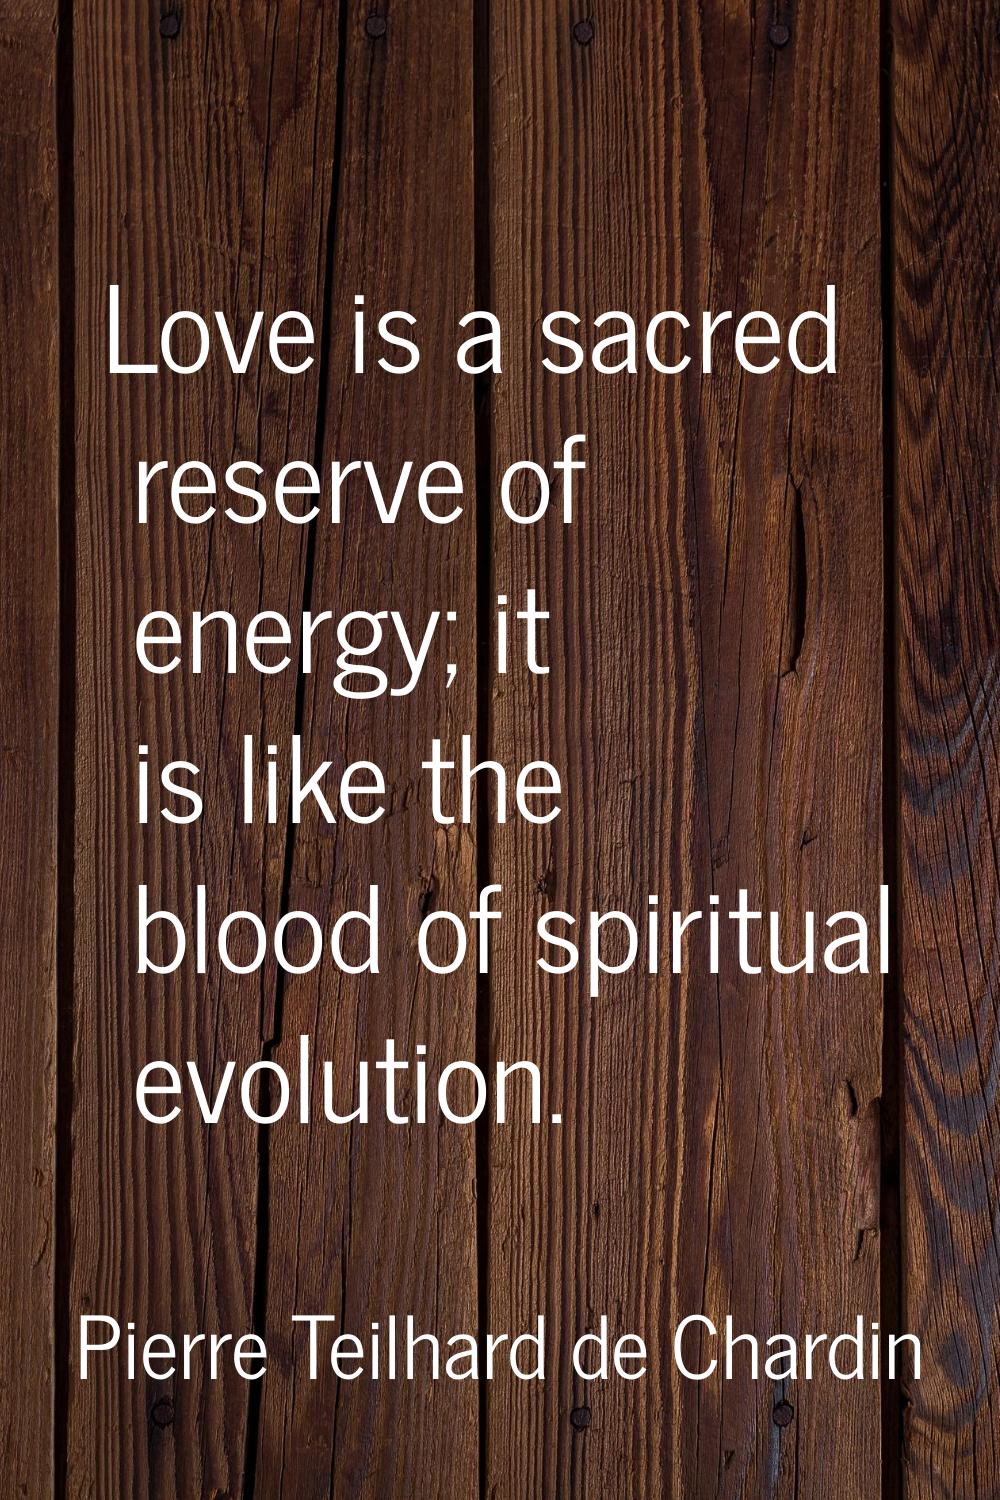 Love is a sacred reserve of energy; it is like the blood of spiritual evolution.